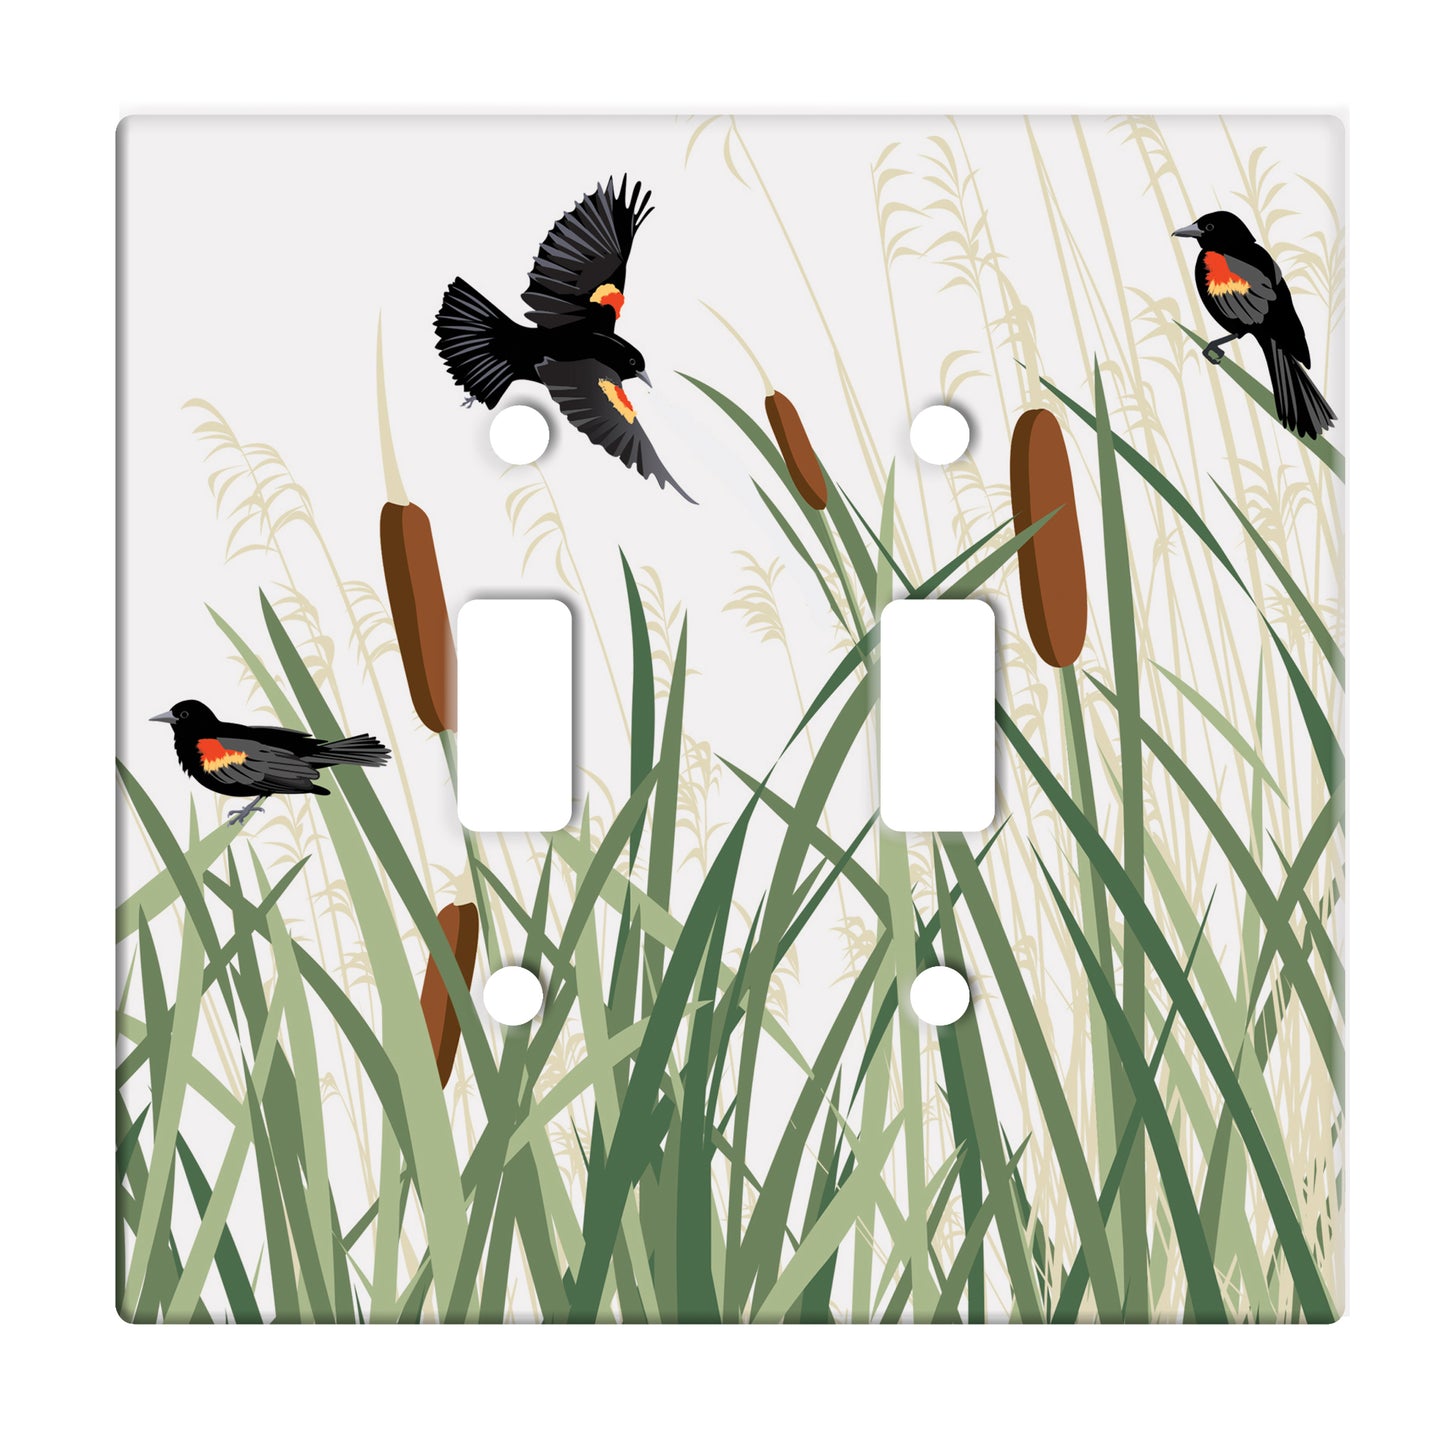 ceramic double toggle switch plate featuring reeds with cattails. sitting upon them and flying above them are blackbirds with red wings.